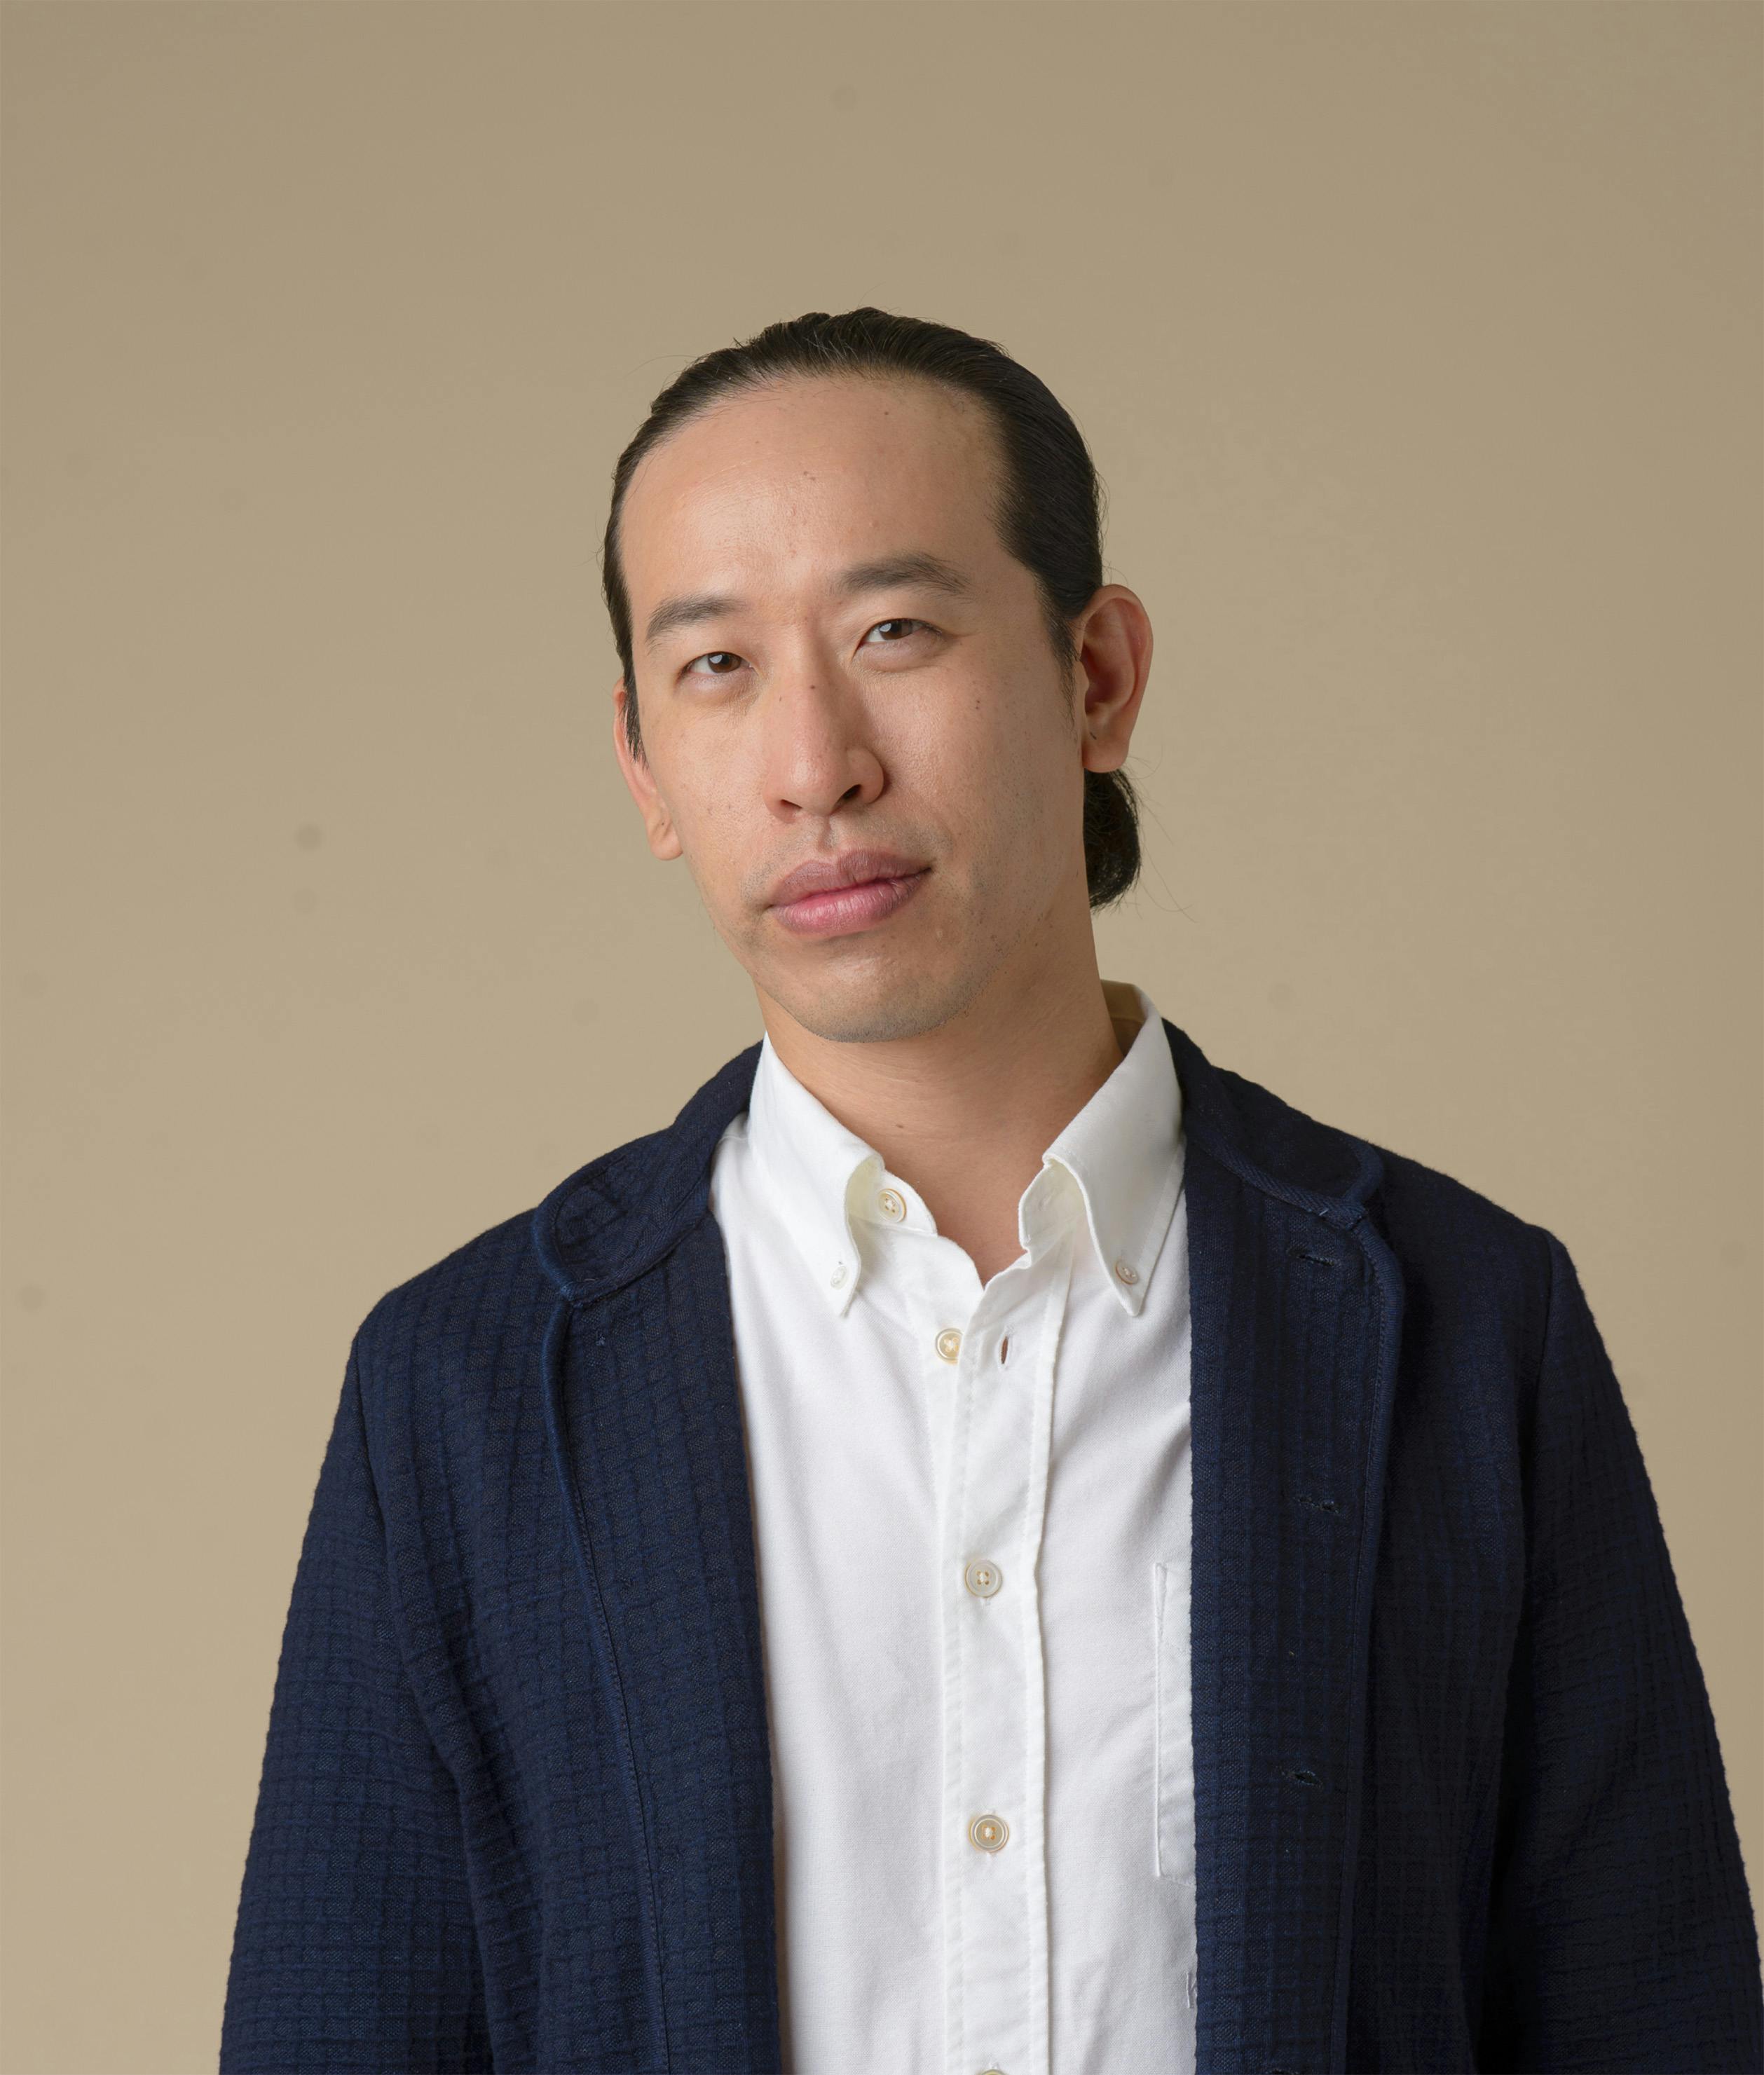 Lee-Sean Huang teaches Business at Campus